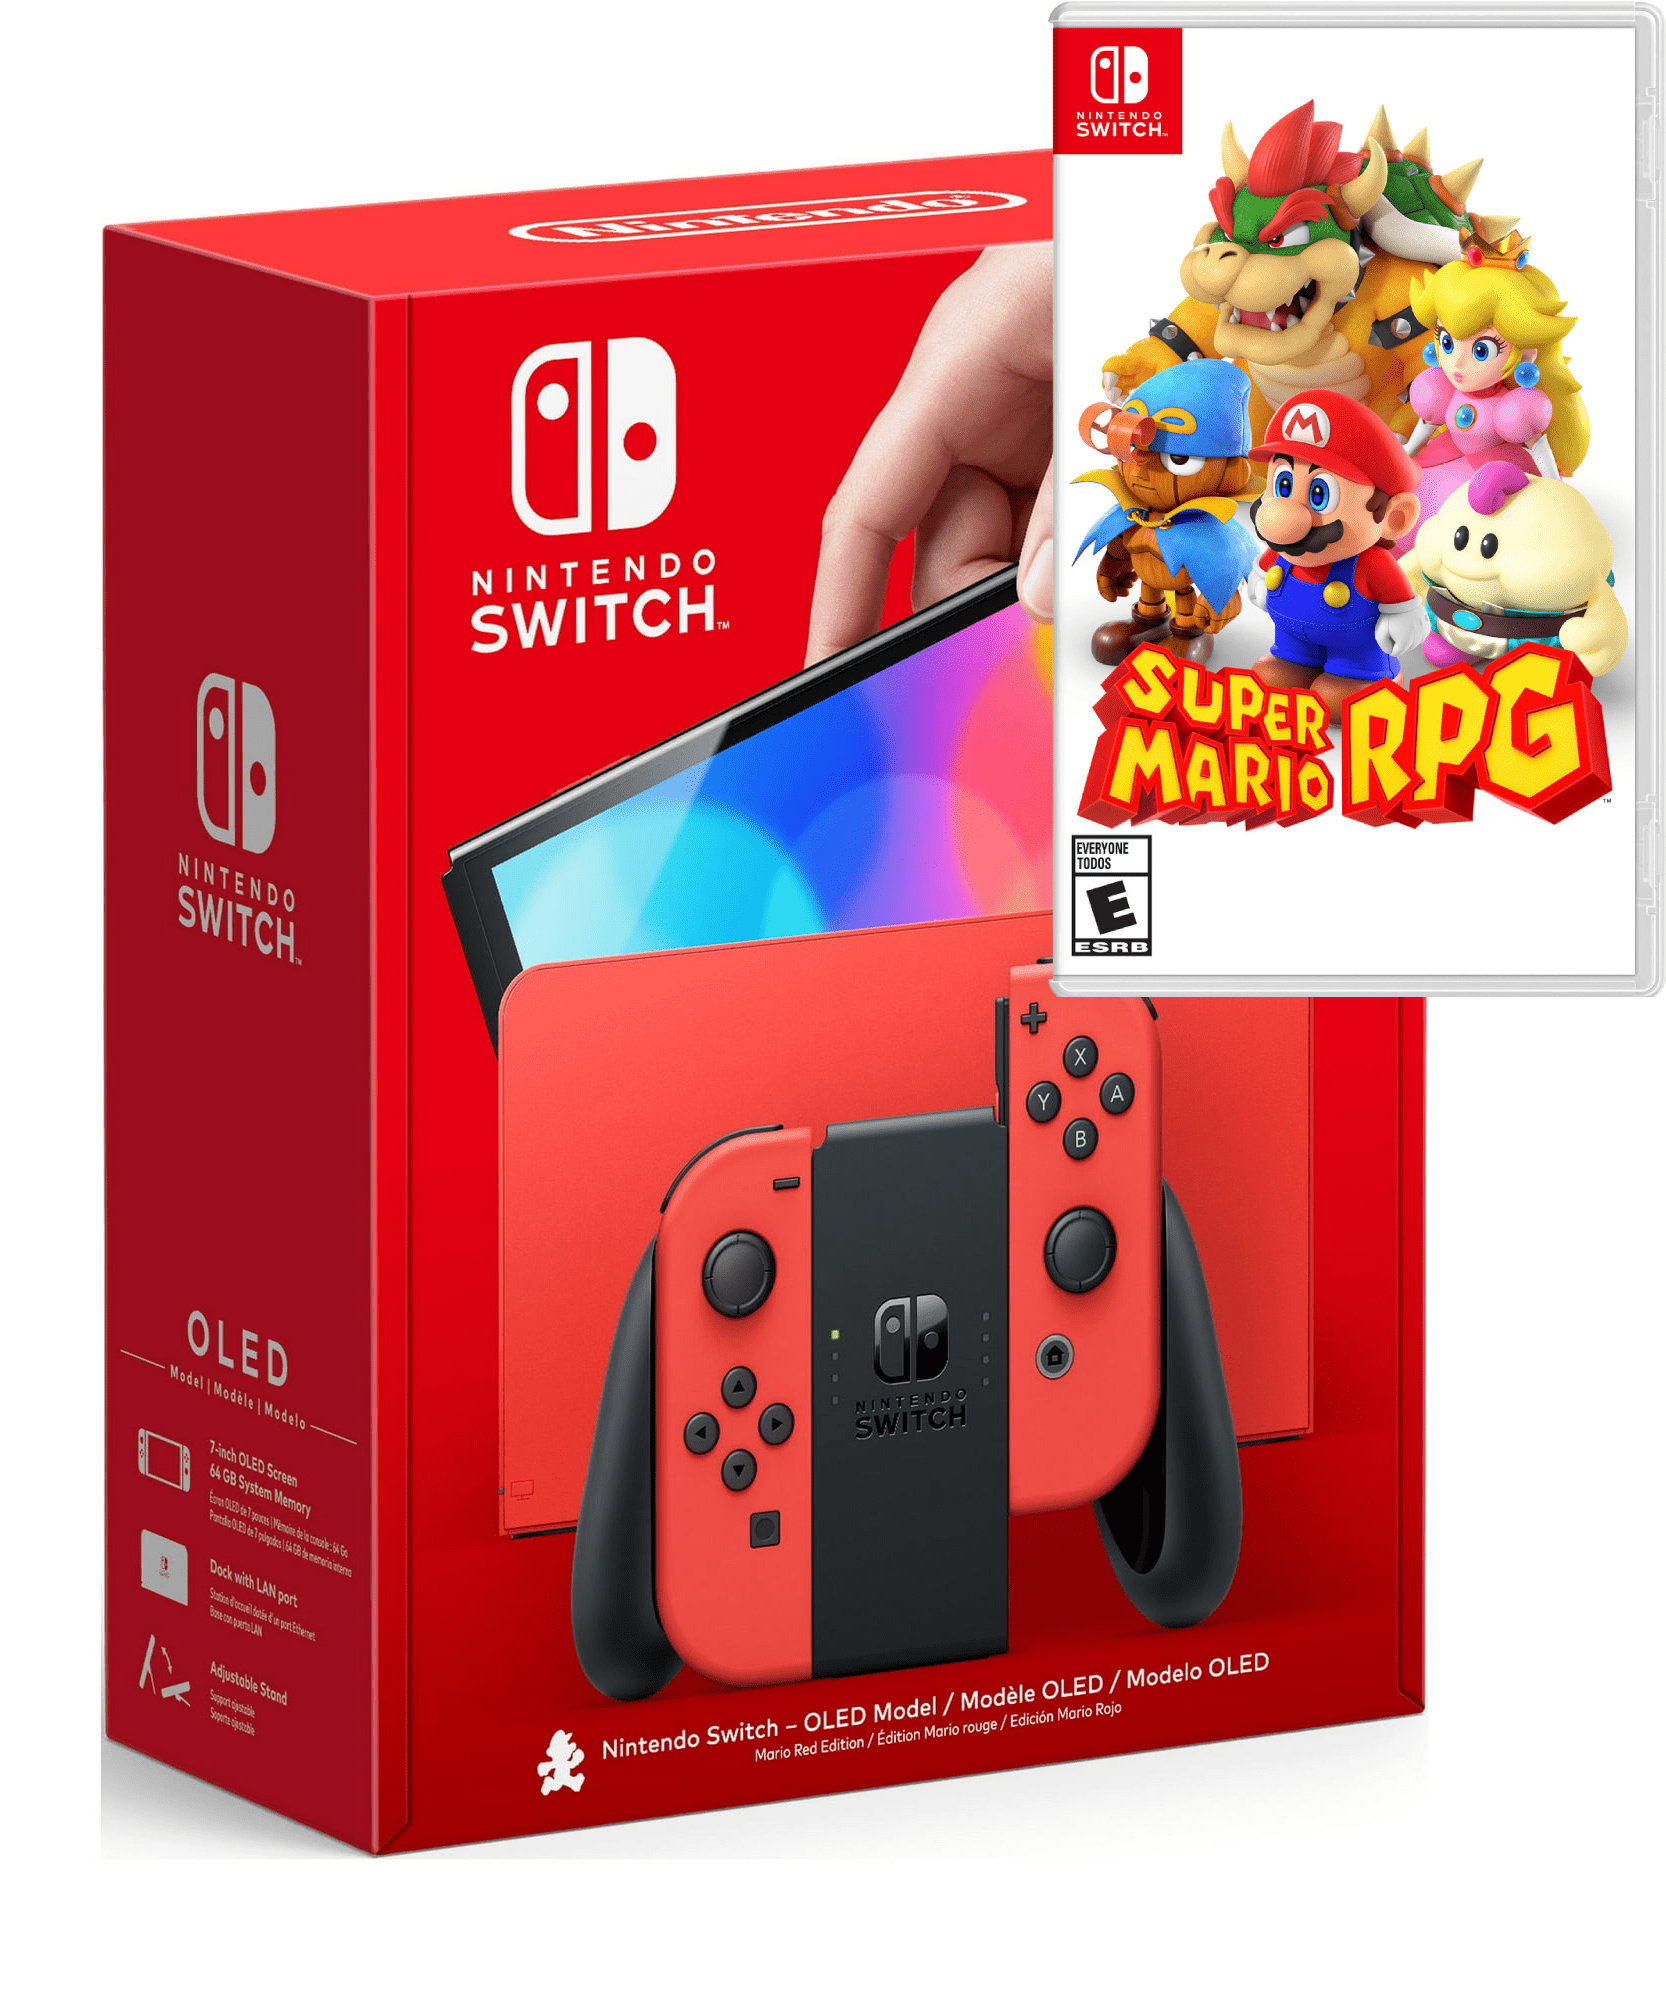 Nintendo Switch OLED Model w/ Red Edition with Super Mario RPG